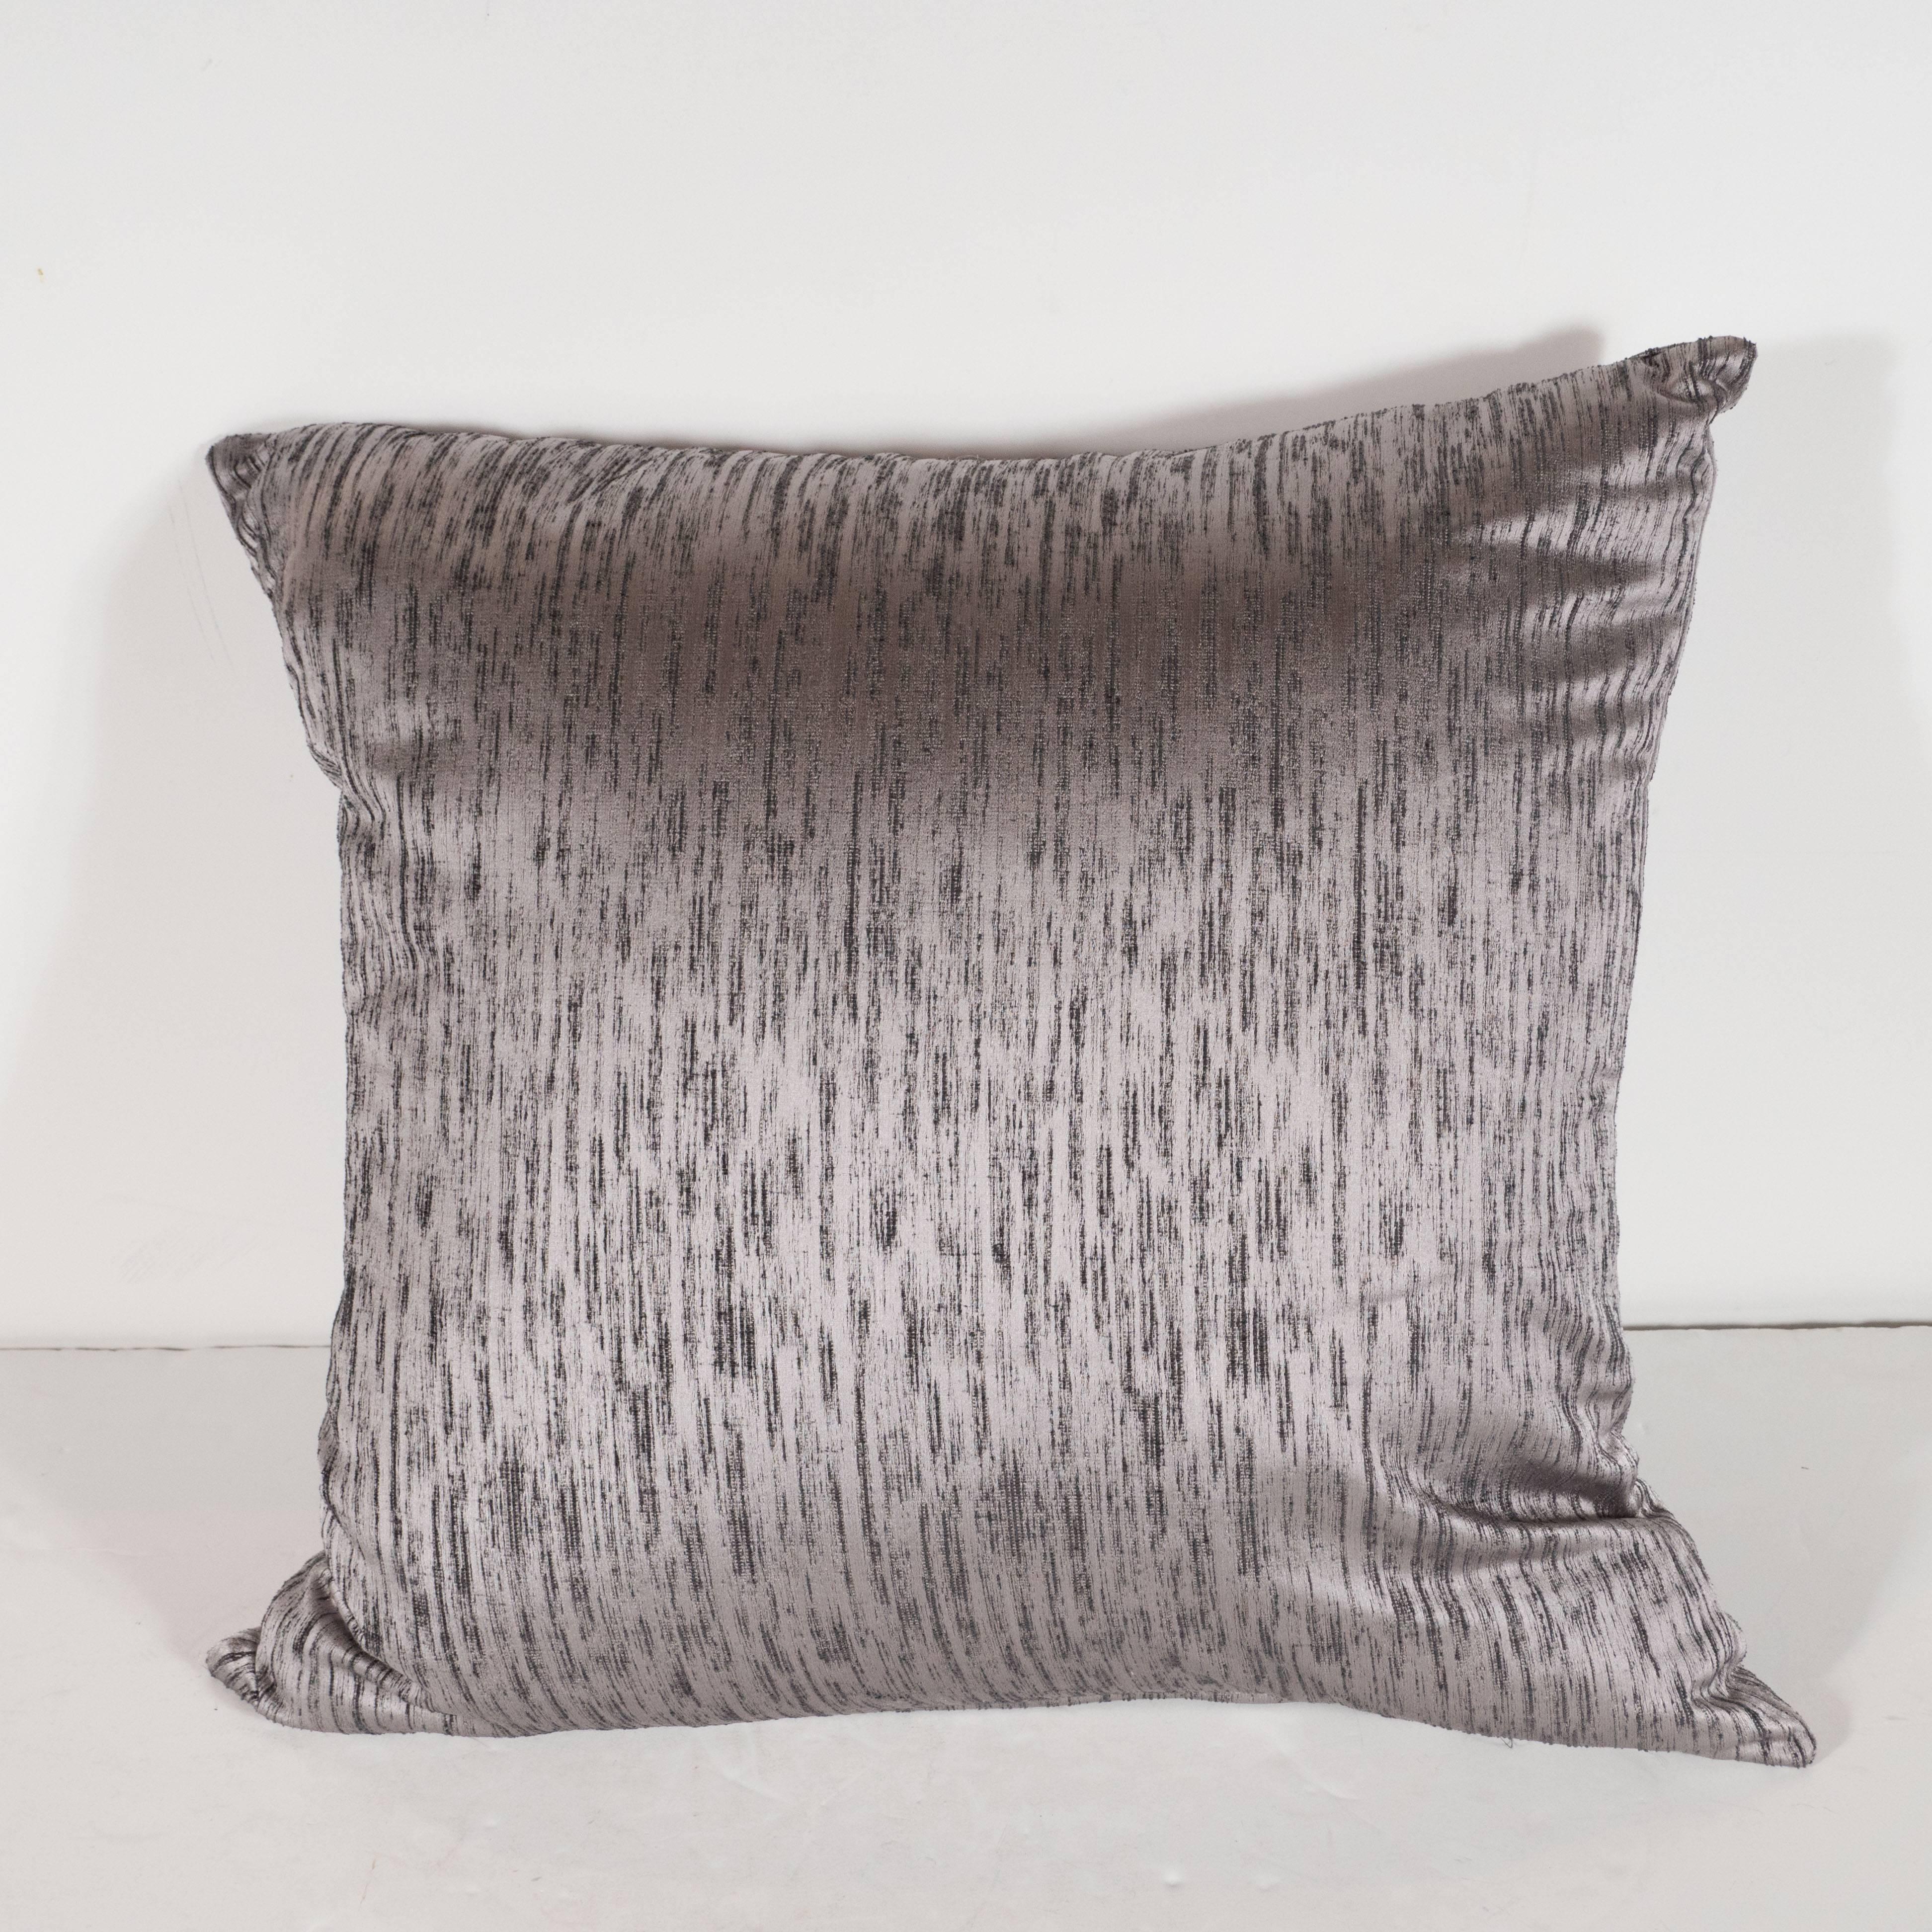 This gorgeous pair of modernist pillows are hand finished in a beautiful silvered lavender silk fabric replete with a wealth of striated organic texture. They would be a stunning addition to any style of interior from classic Mid-Century Modern to